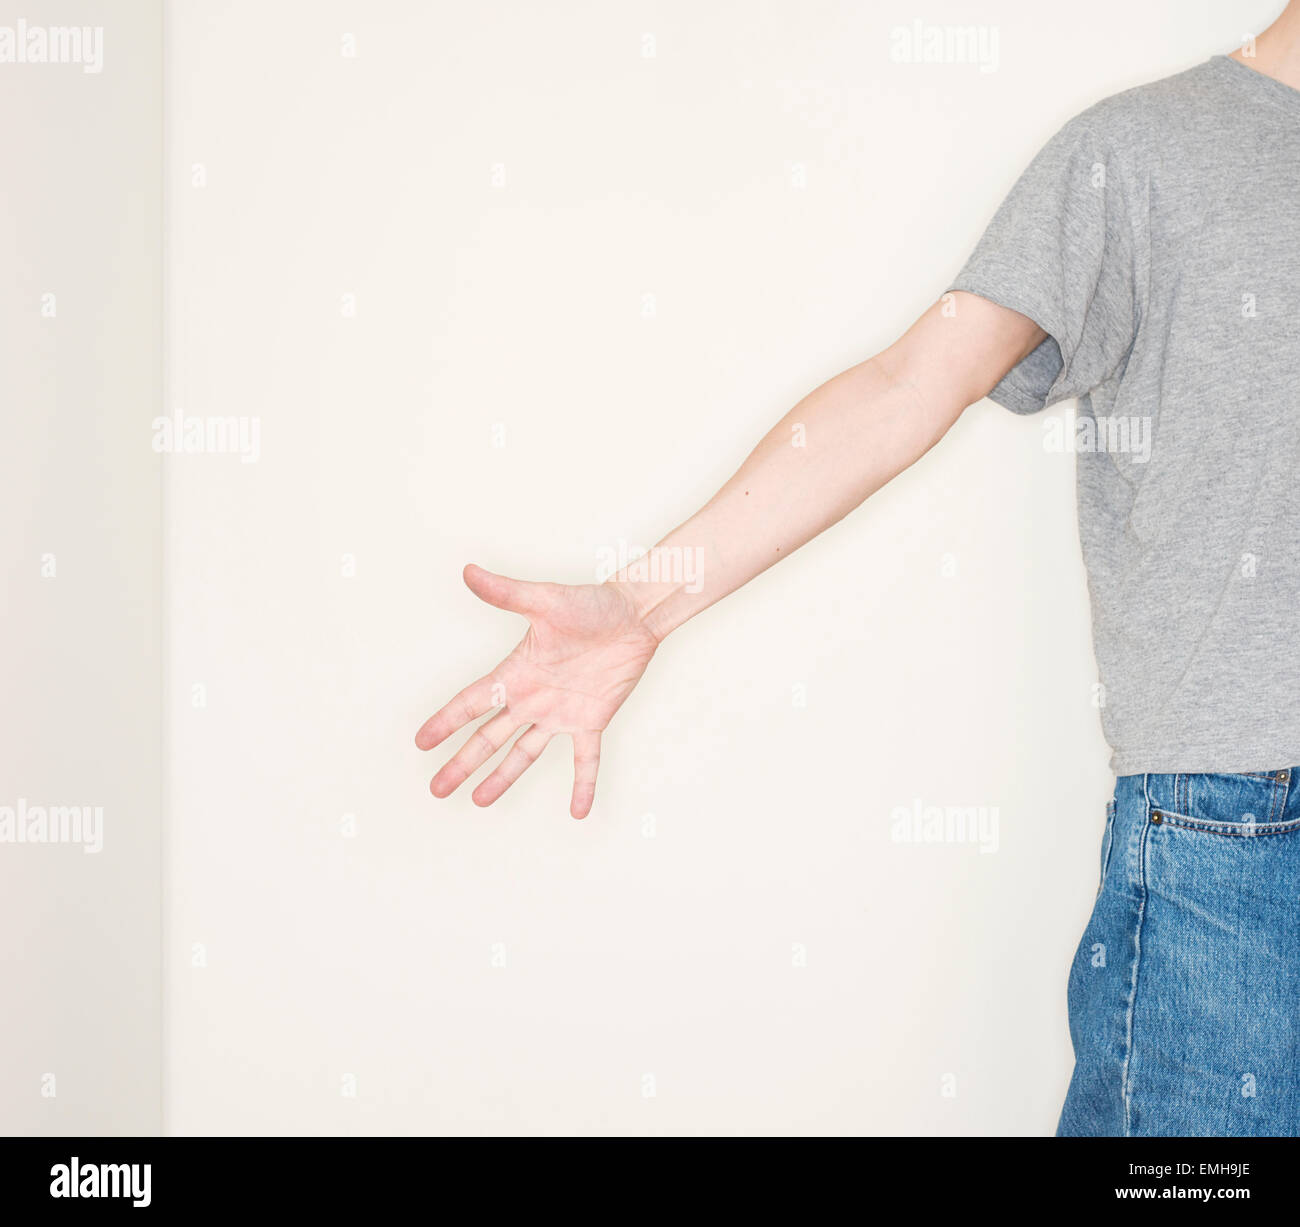 Man reaching out a helping hand. Conceptual image of assistance, being helpful and reaching out. Stock Photo